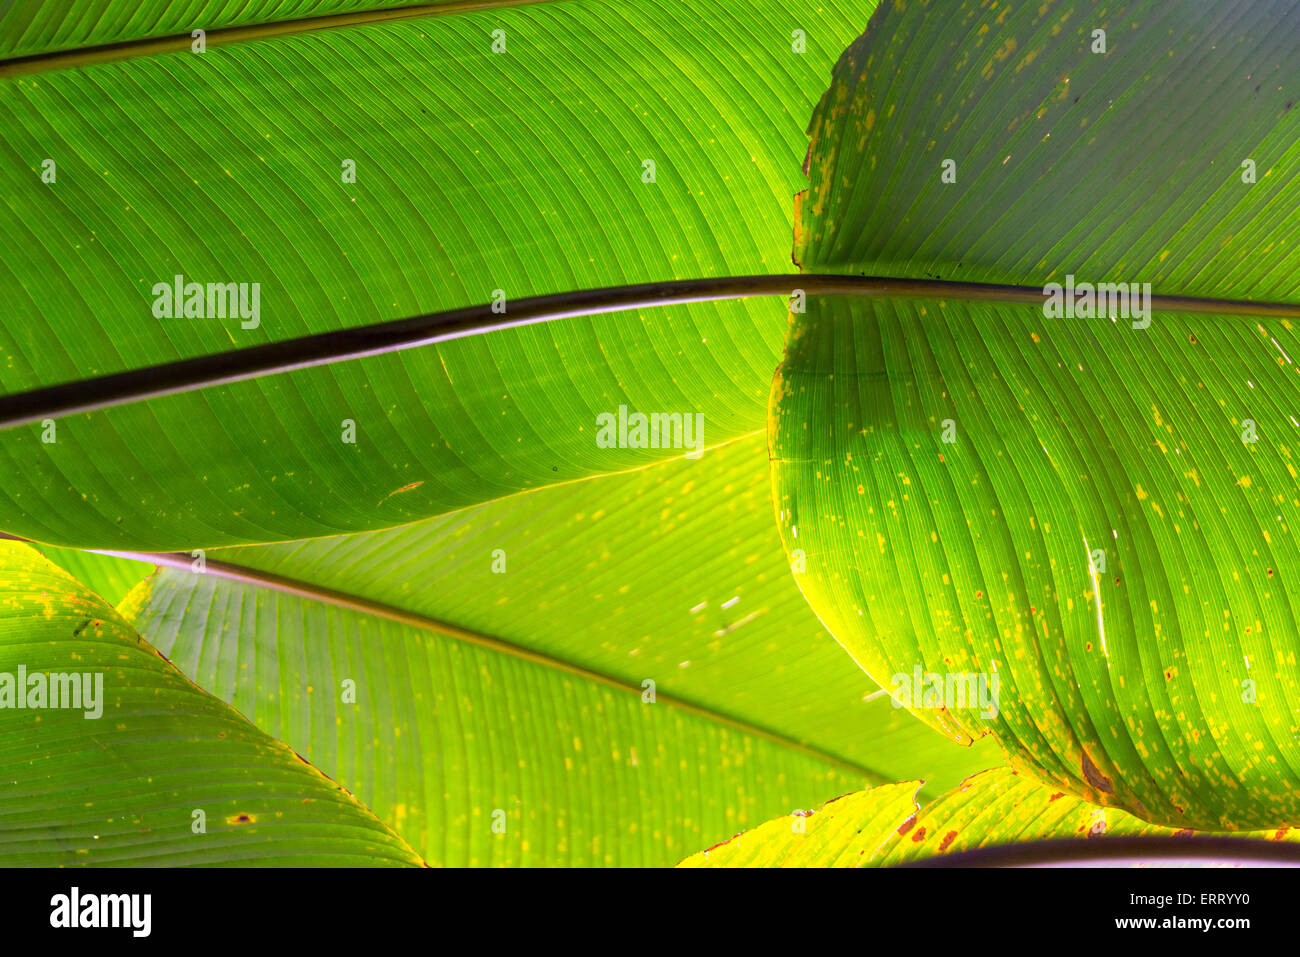 Abstract image of five large green leaves in a cloud forest near Mindo, Ecuador Stock Photo